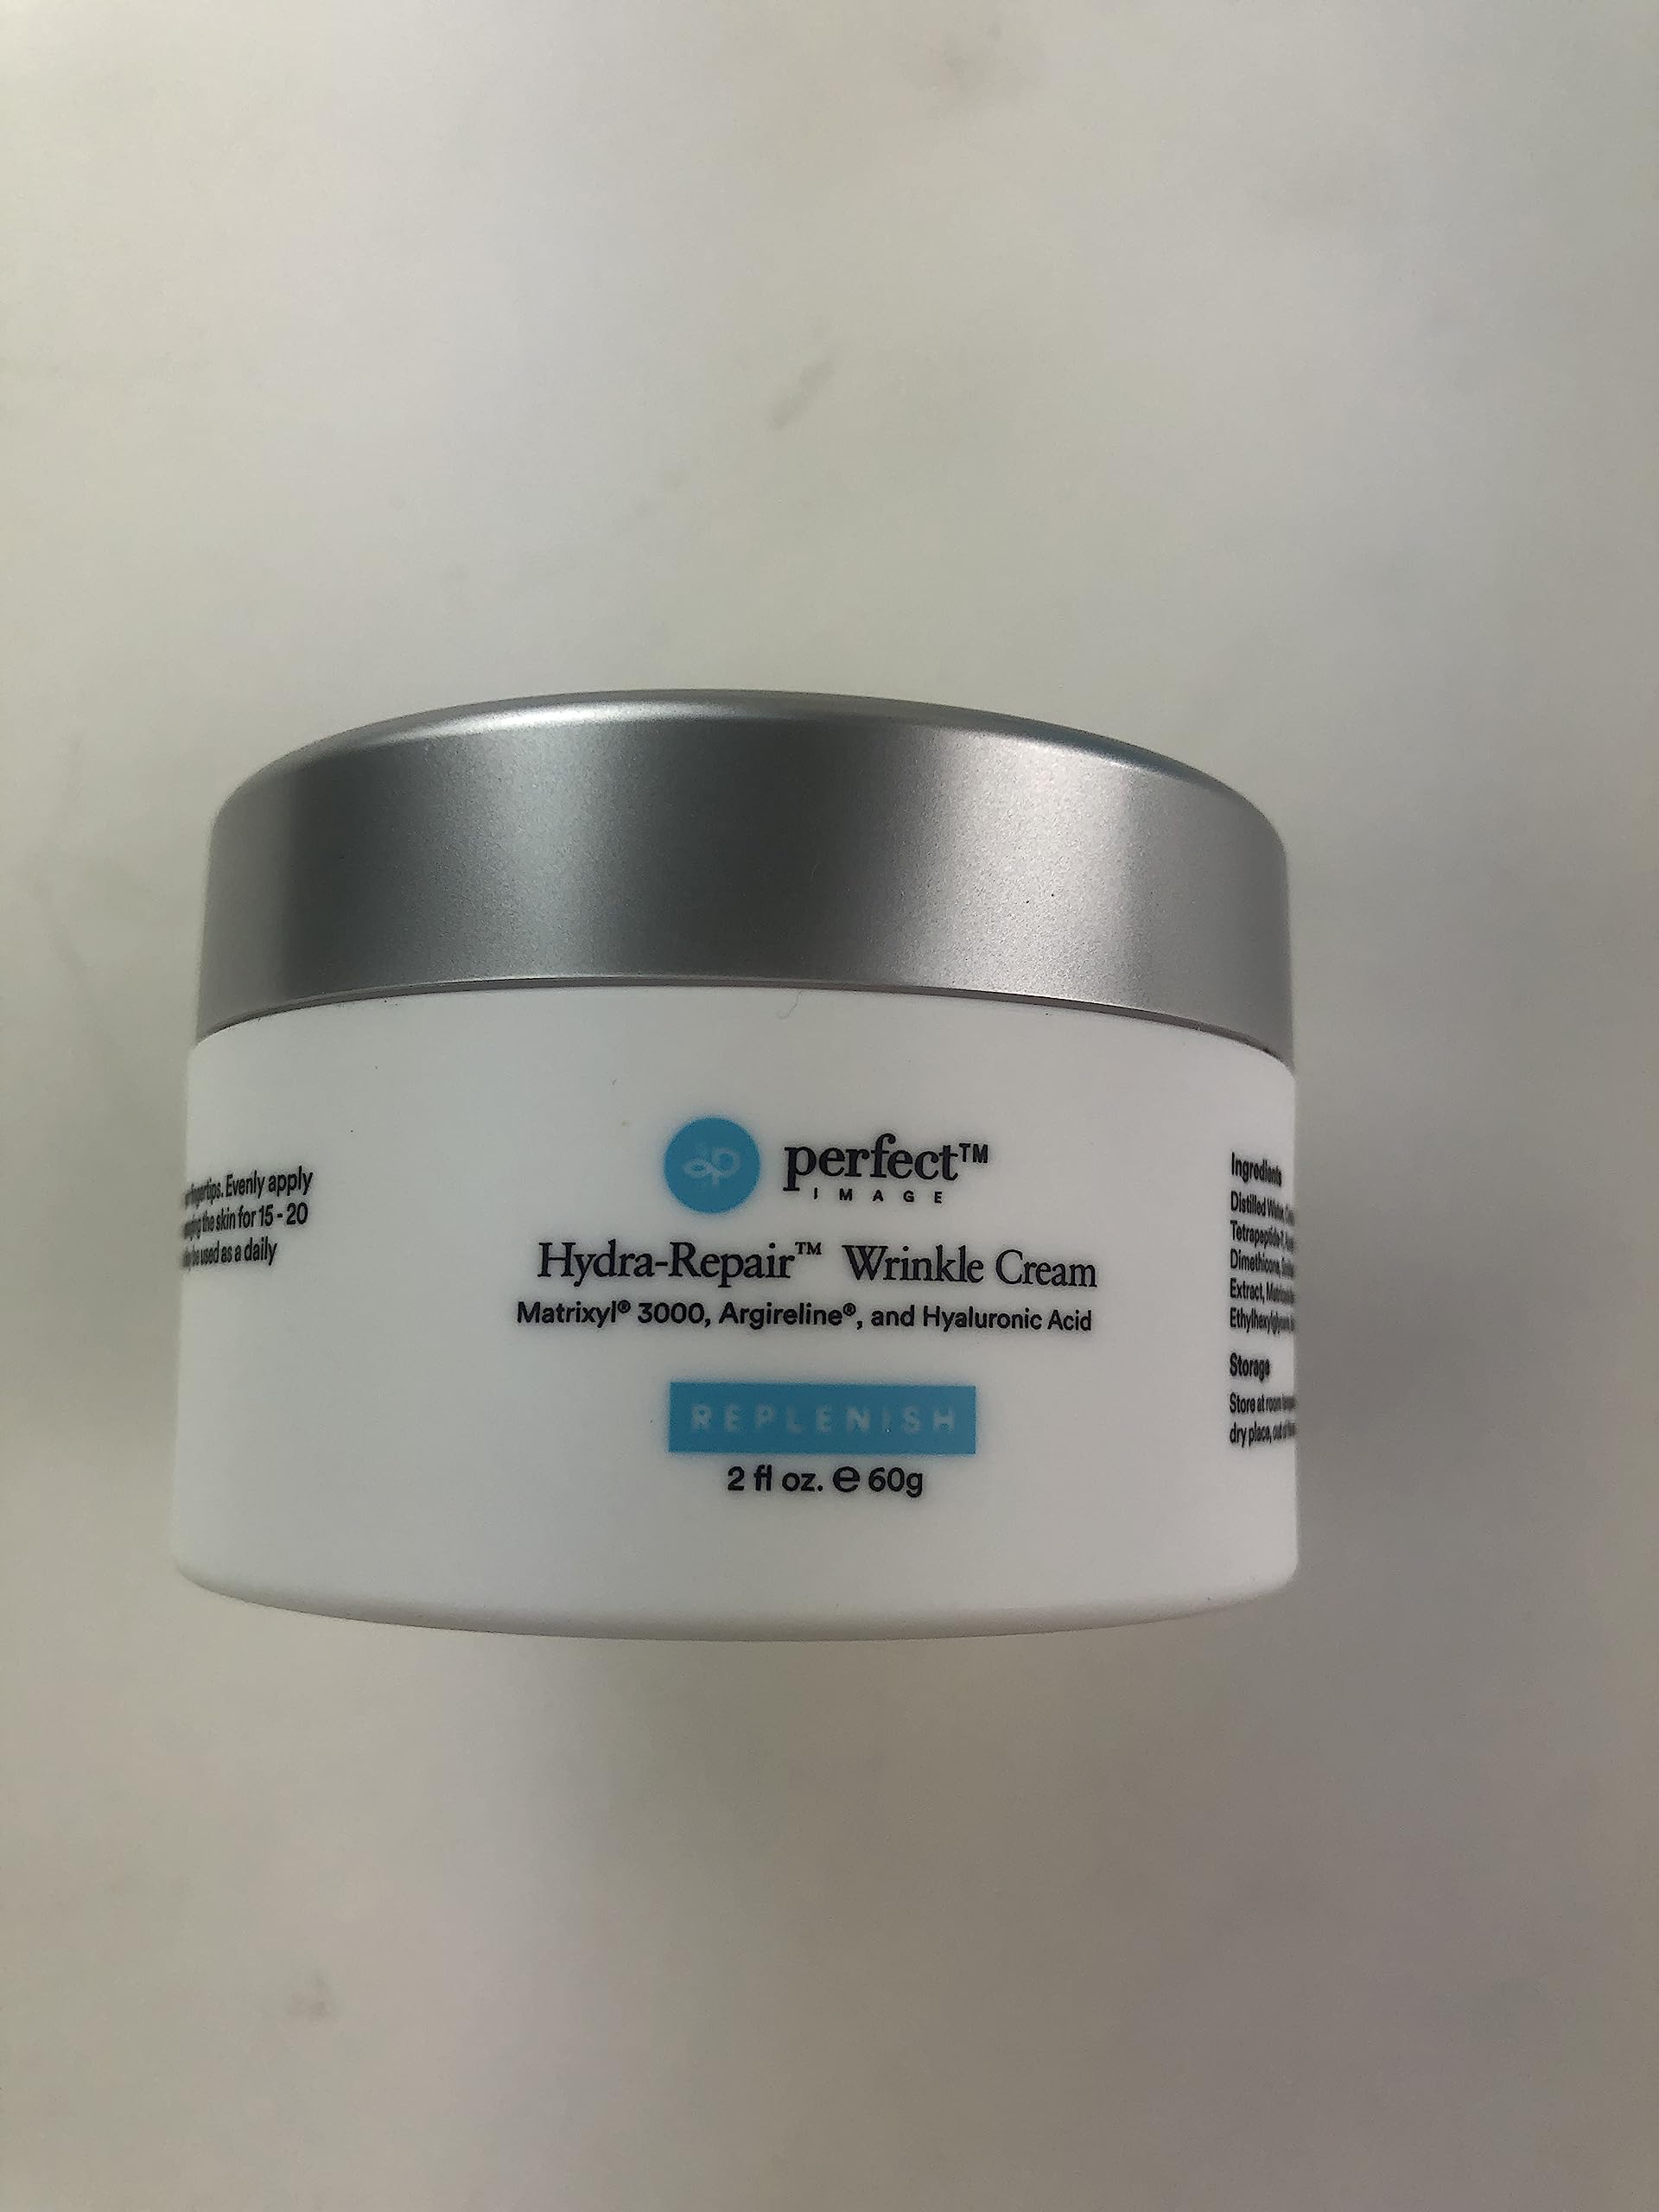 Perfect Image Hydra-Repair Wrinkle Cream for Face (Post Peel), Anti Wrinkle Cream with Matrixyl 3000, Argireline, Hyaluronic Acid, and Natural Botanical Extracts